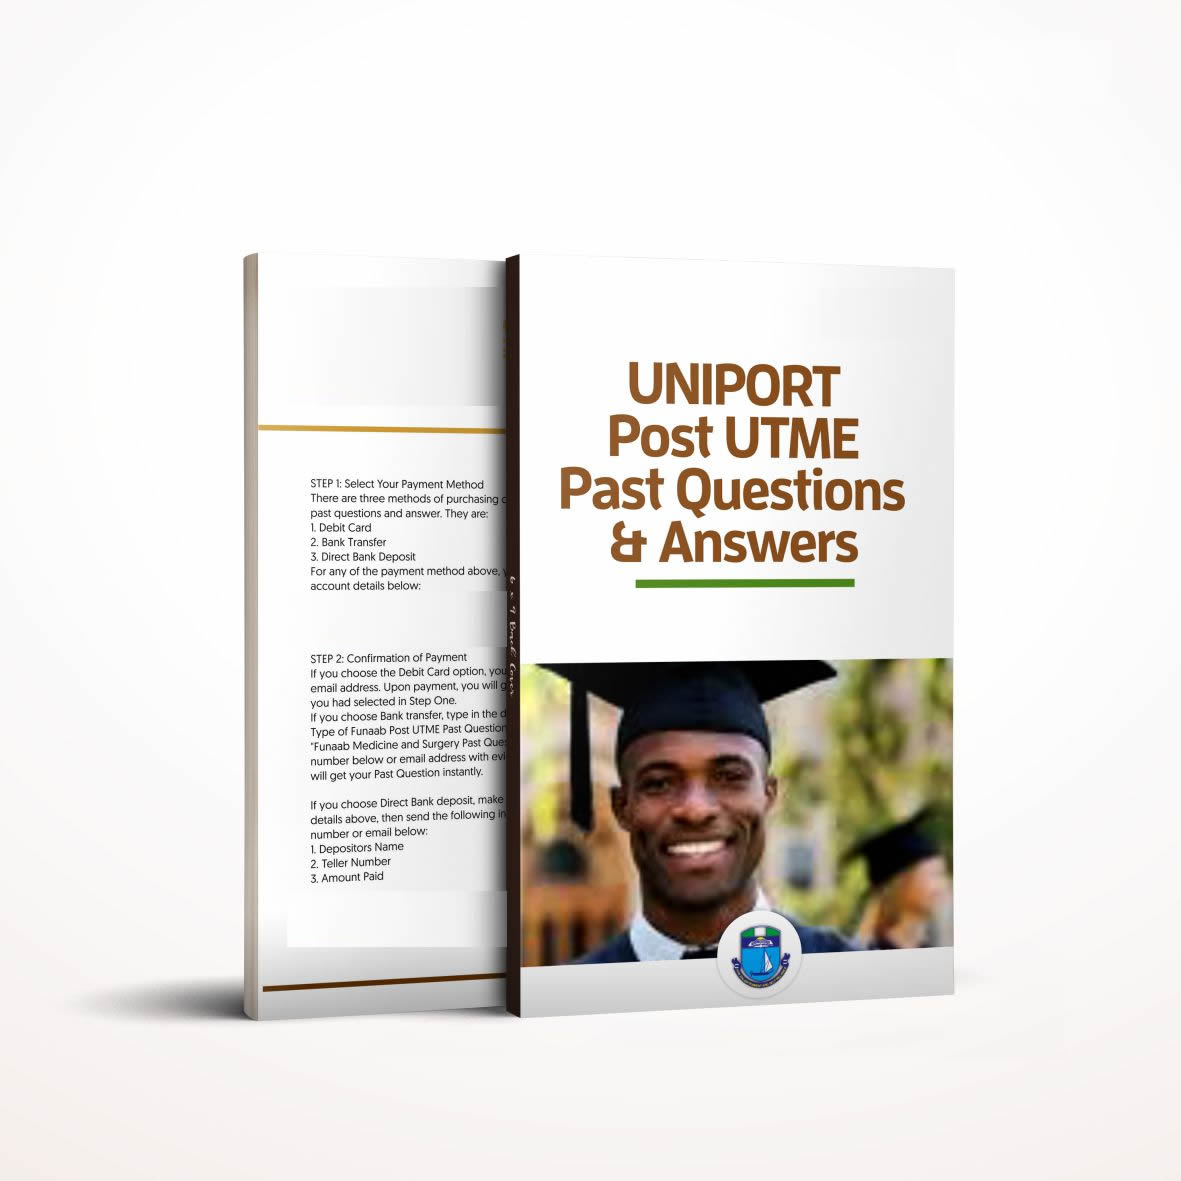 UNIPORT Post UTME past questions and answers